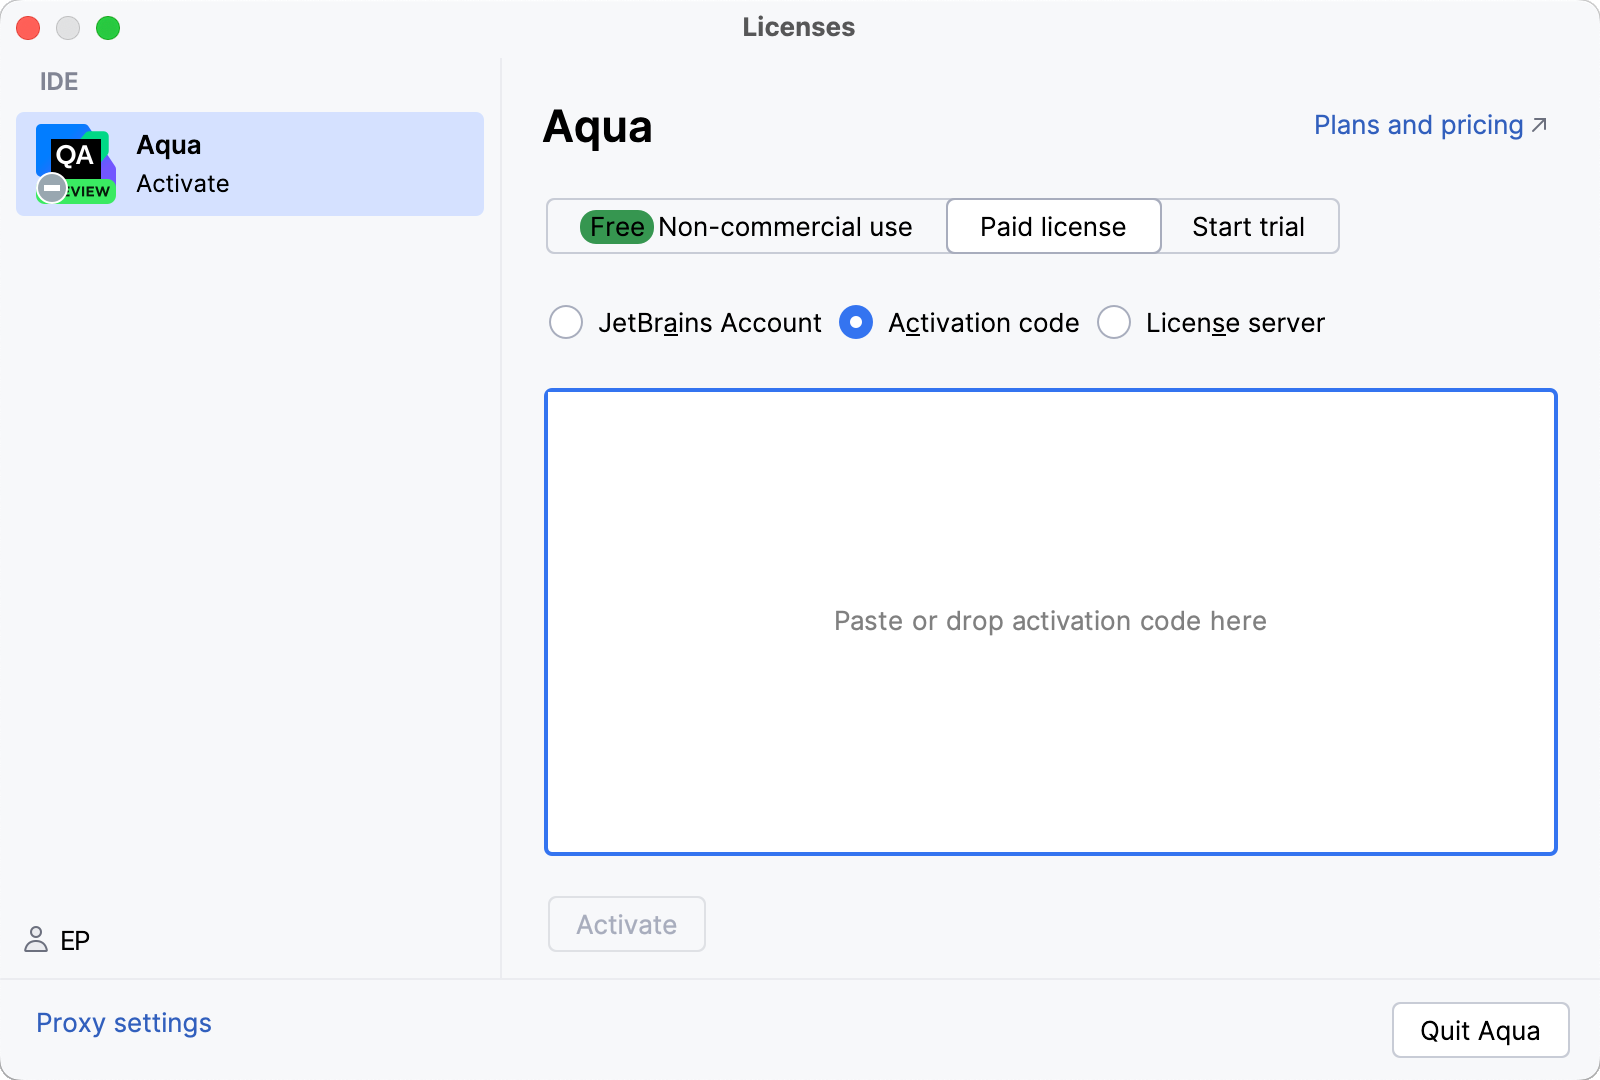 Activate Aqua license with an activation code